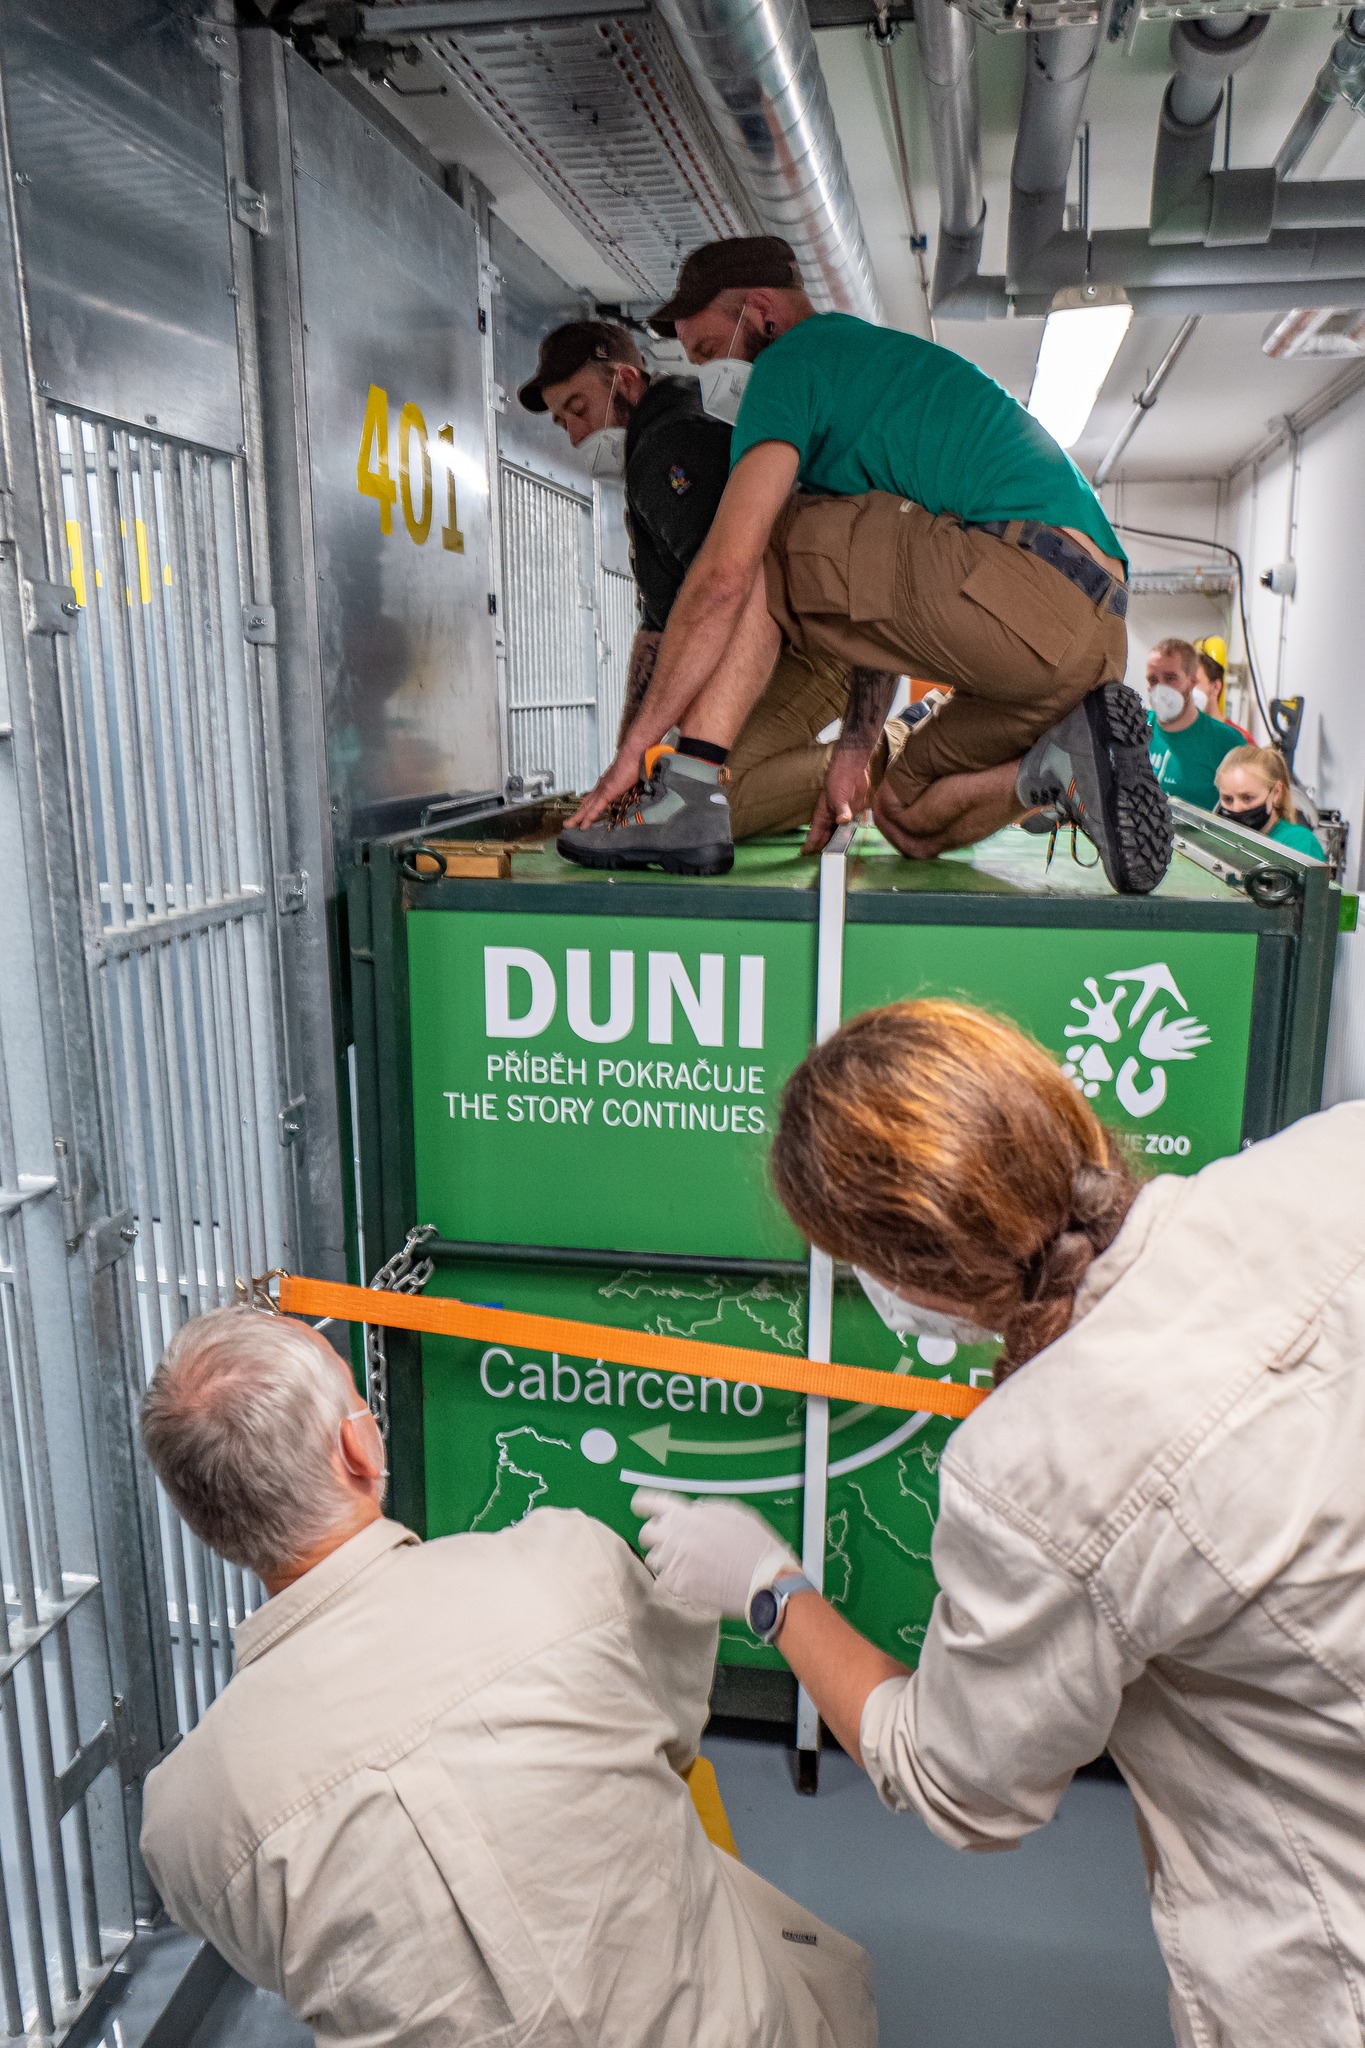 In a moment, the transport box will open and Duni will enter the Dja Reserve - the new gorilla pavilion of the Prague Zoo. Photo by Miroslav Bobek